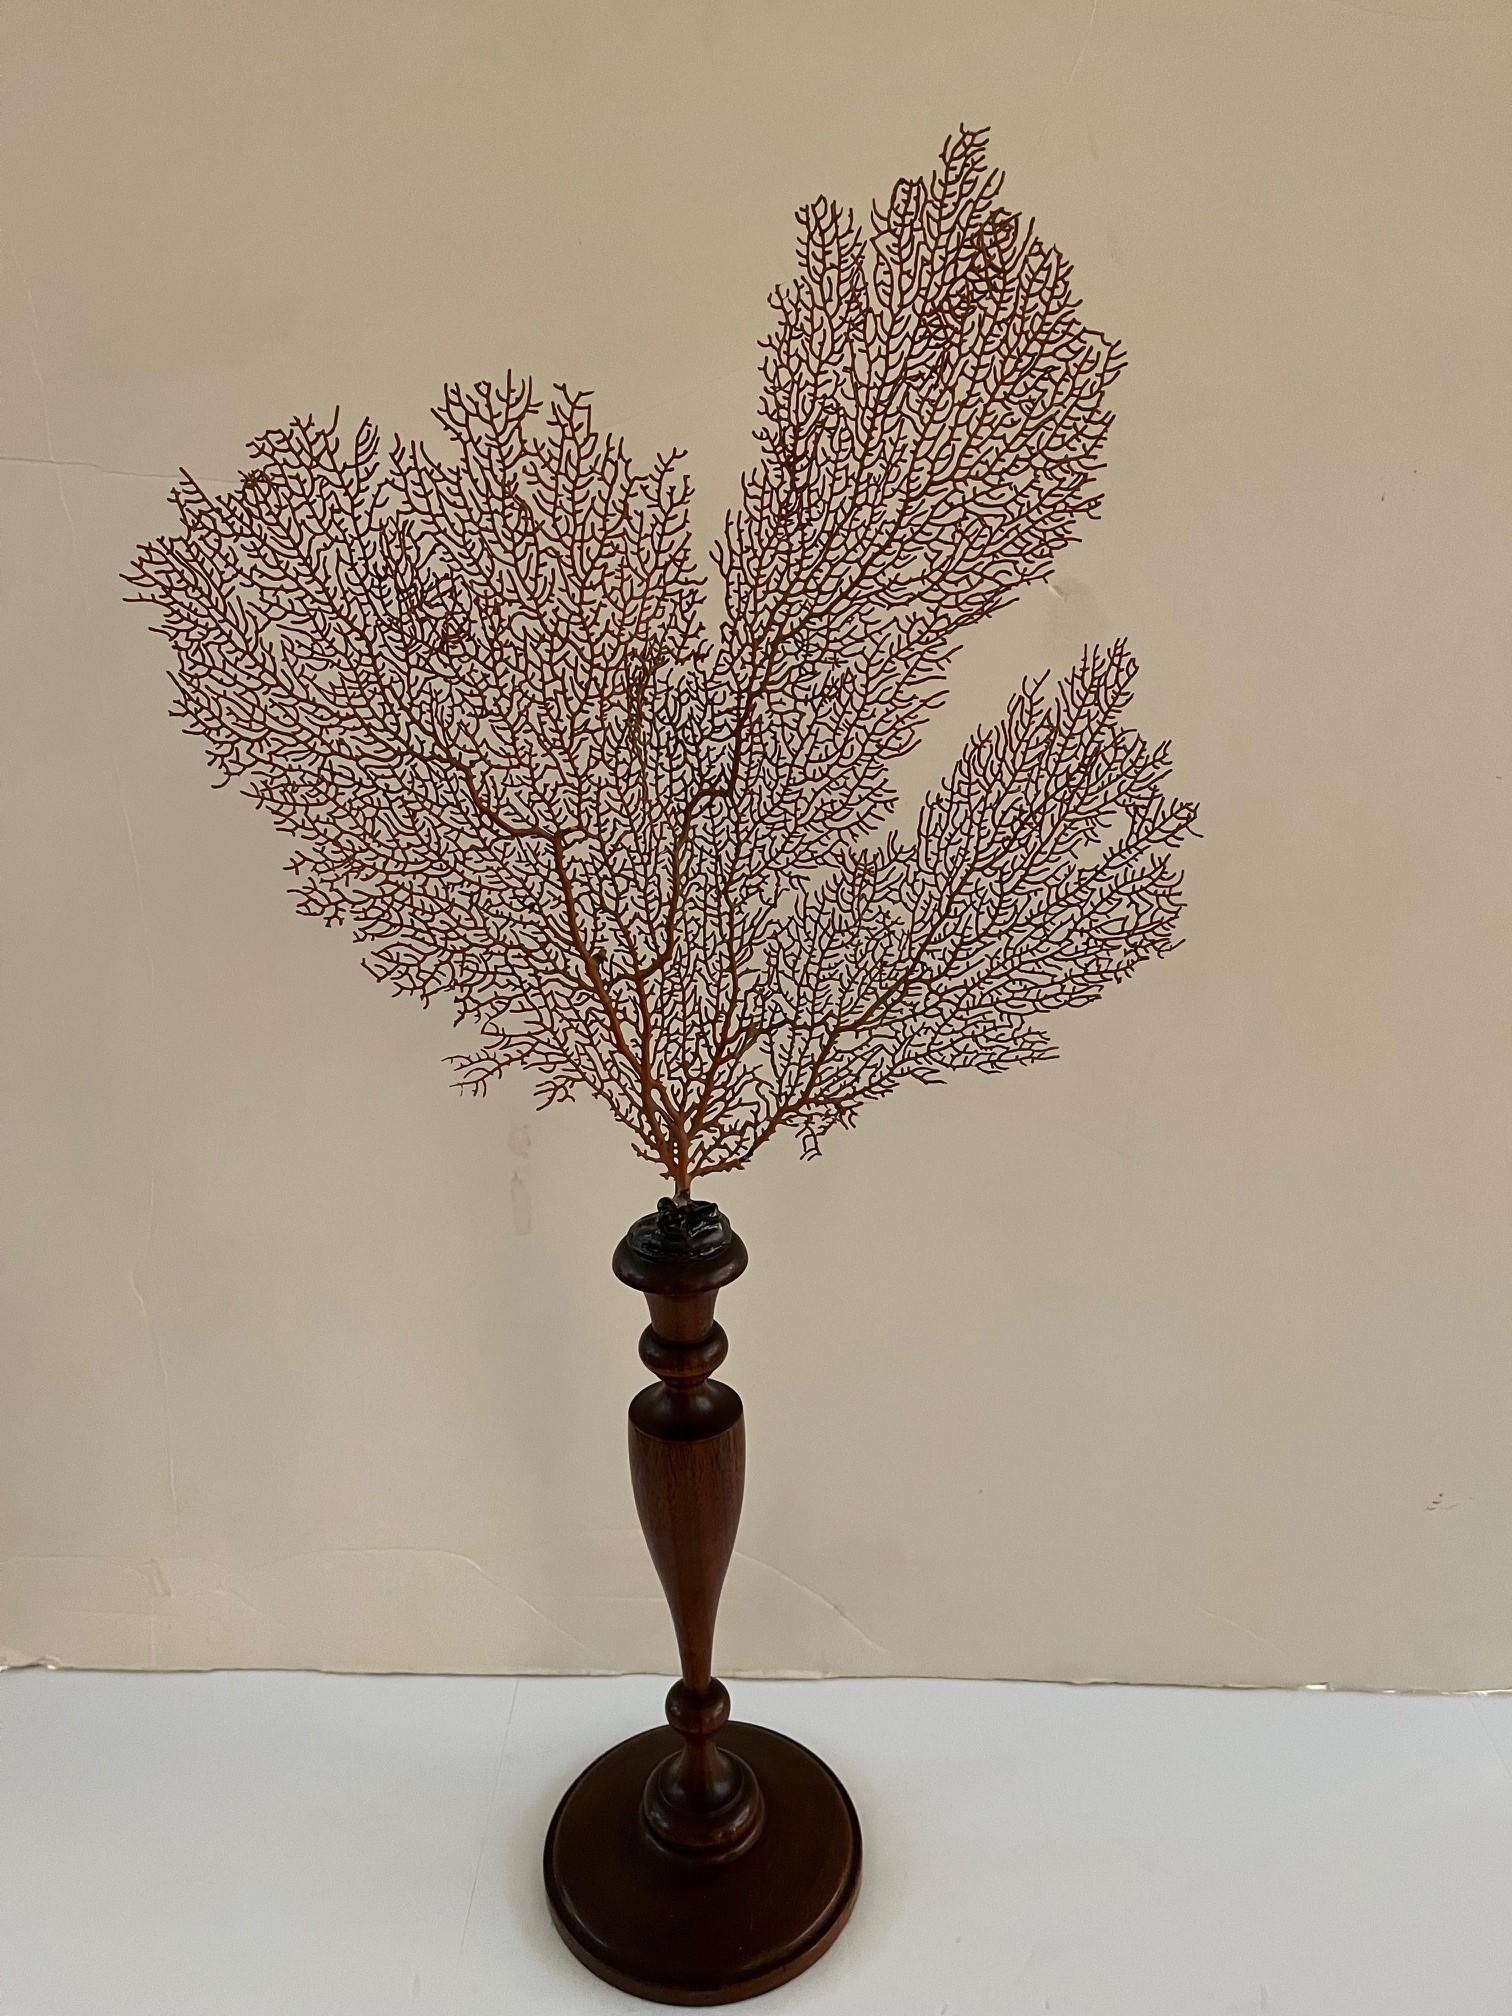 Vintage Set of Three Natural Sea Fan Sculptures on One Black Candlestick Stand and Two on Medium Walnut Color Candlestick, Clear Lacquered to Preserved Natural Color, real preserved dried Sea Fan, Soft cool Coral Home Decor.
Dimensions: 
14